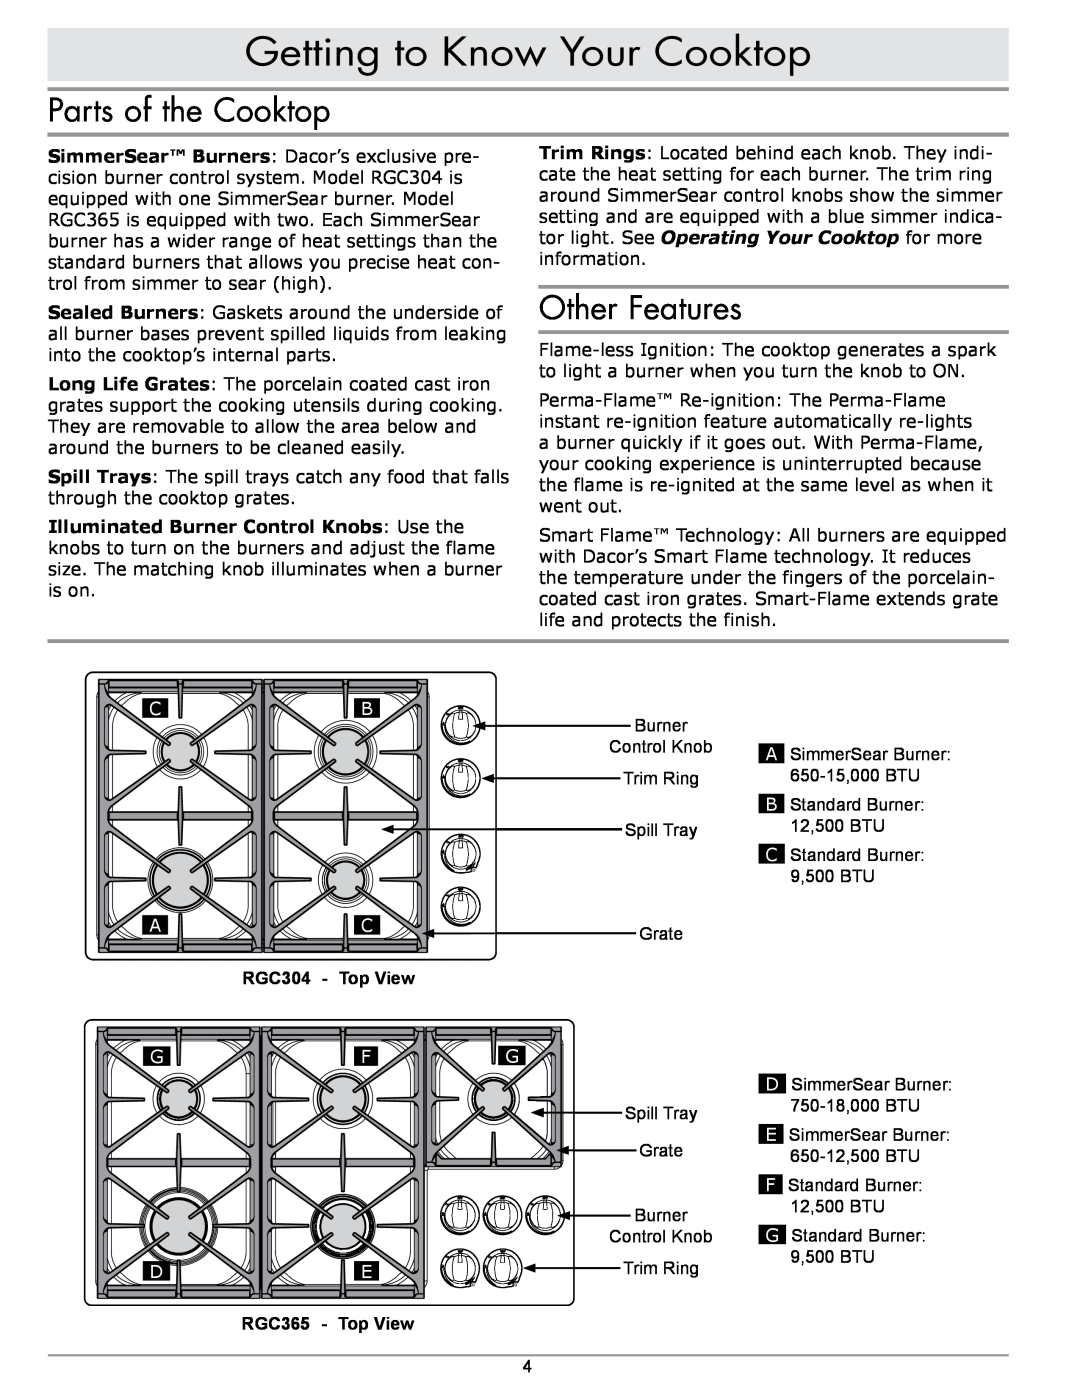 Dacor manual Getting to Know Your Cooktop, Parts of the Cooktop, Other Features, RGC304 - Top View, RGC365 - Top View 